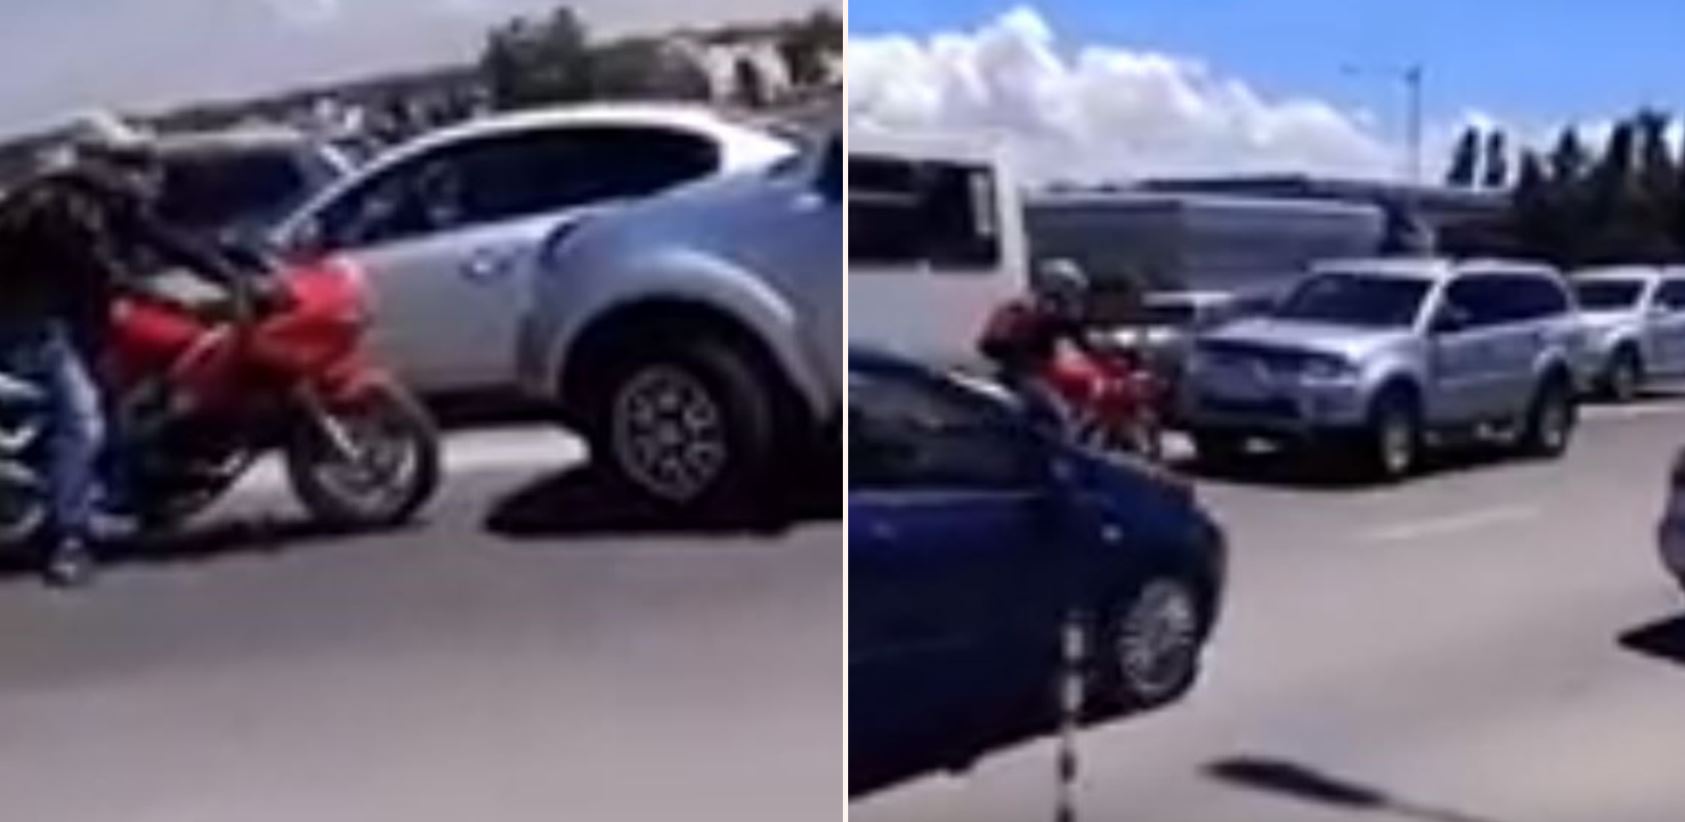 Biker brilliantly confronts SUV driver who tries to cut traffic